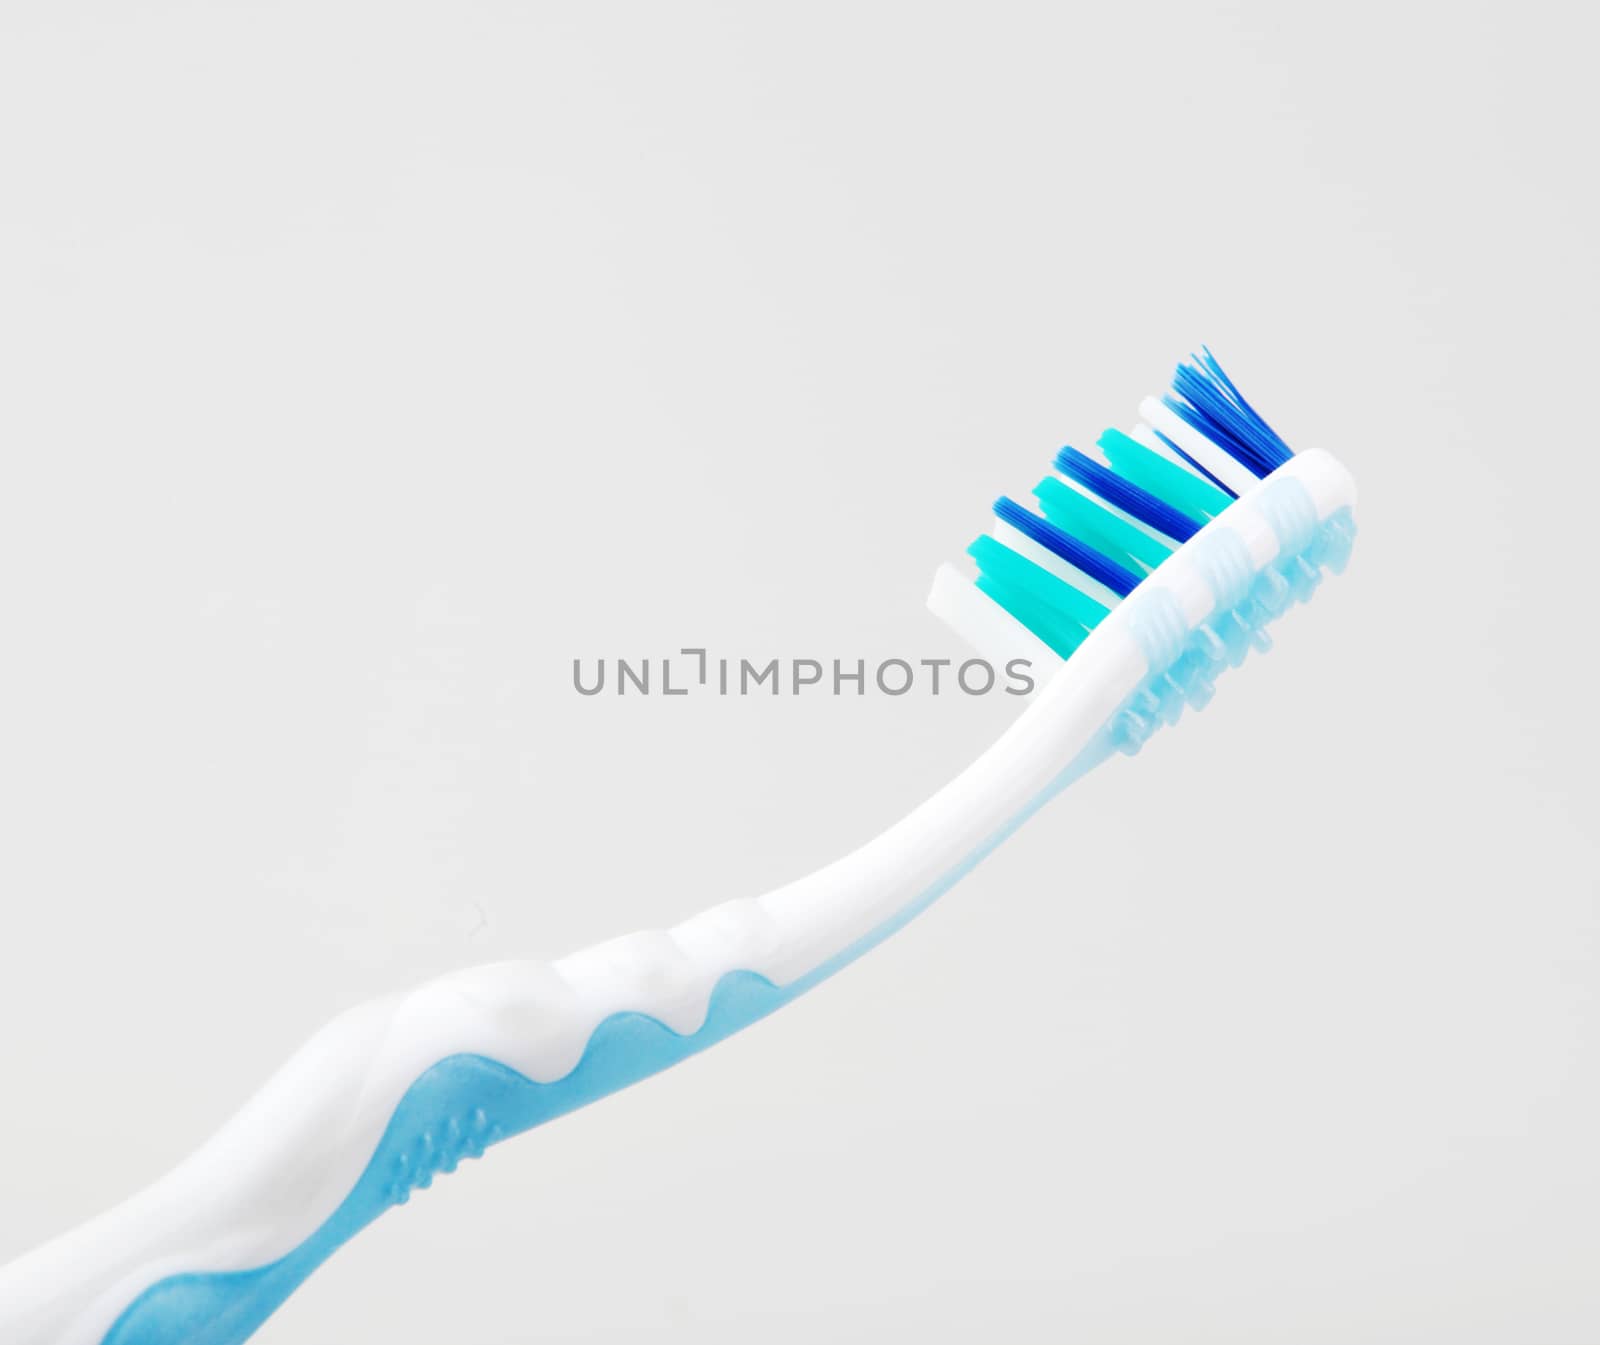 Plastic Toothbrush Against White Background by nenovbrothers